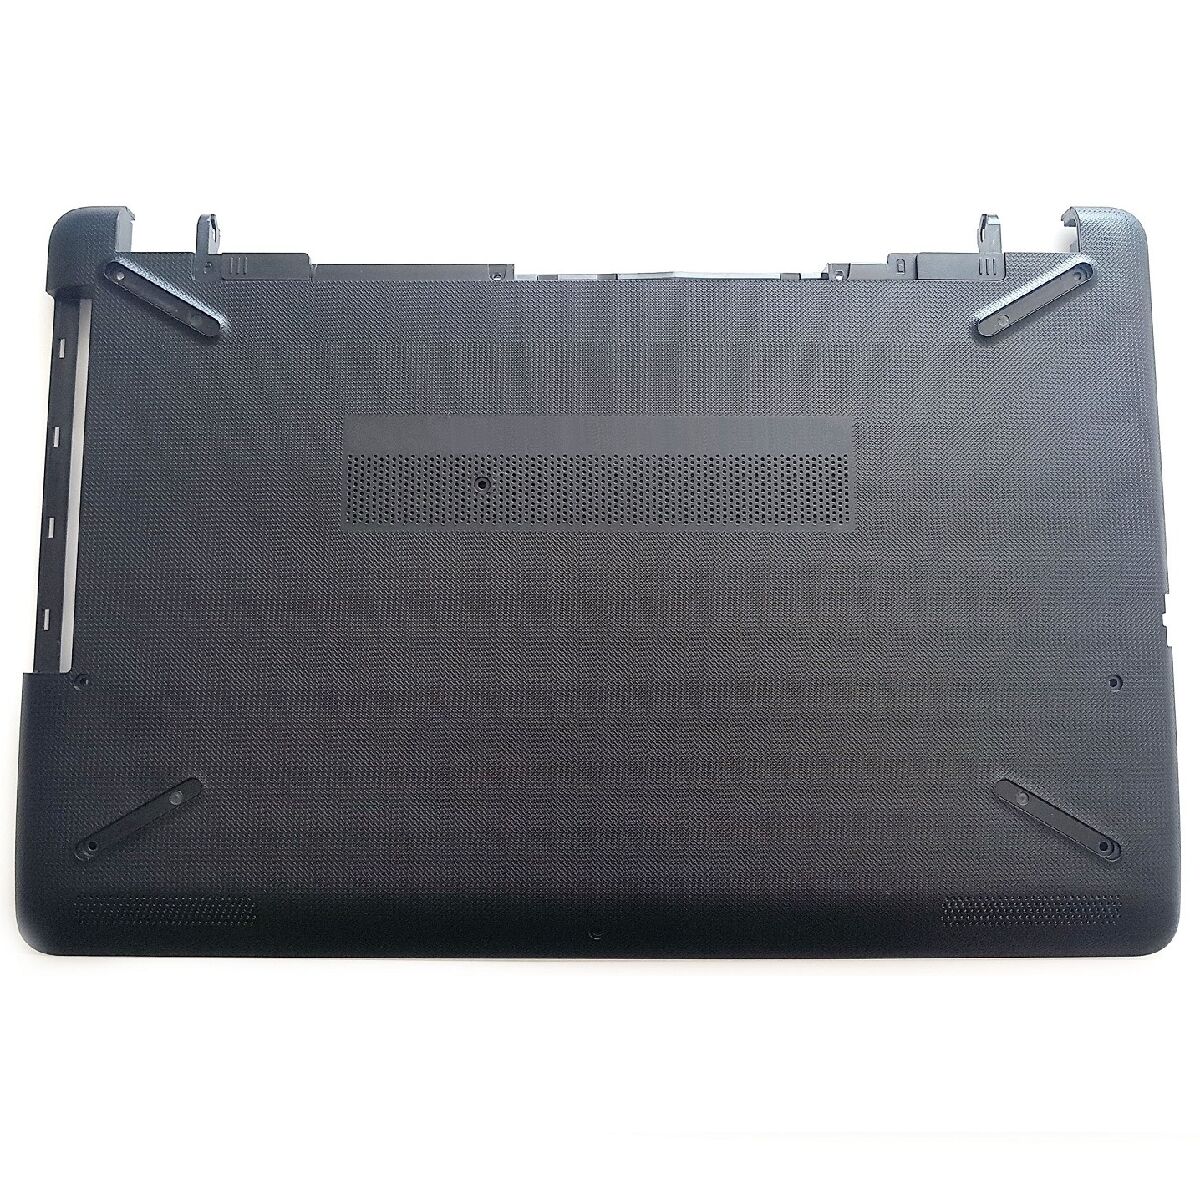 Hp 15-BS040NT, 15-BS041NT, 15-BS042NT, 15-BS043NT, 15-BS044NT, 15-BS045NT Uyumlu Alt Kasa D Cover